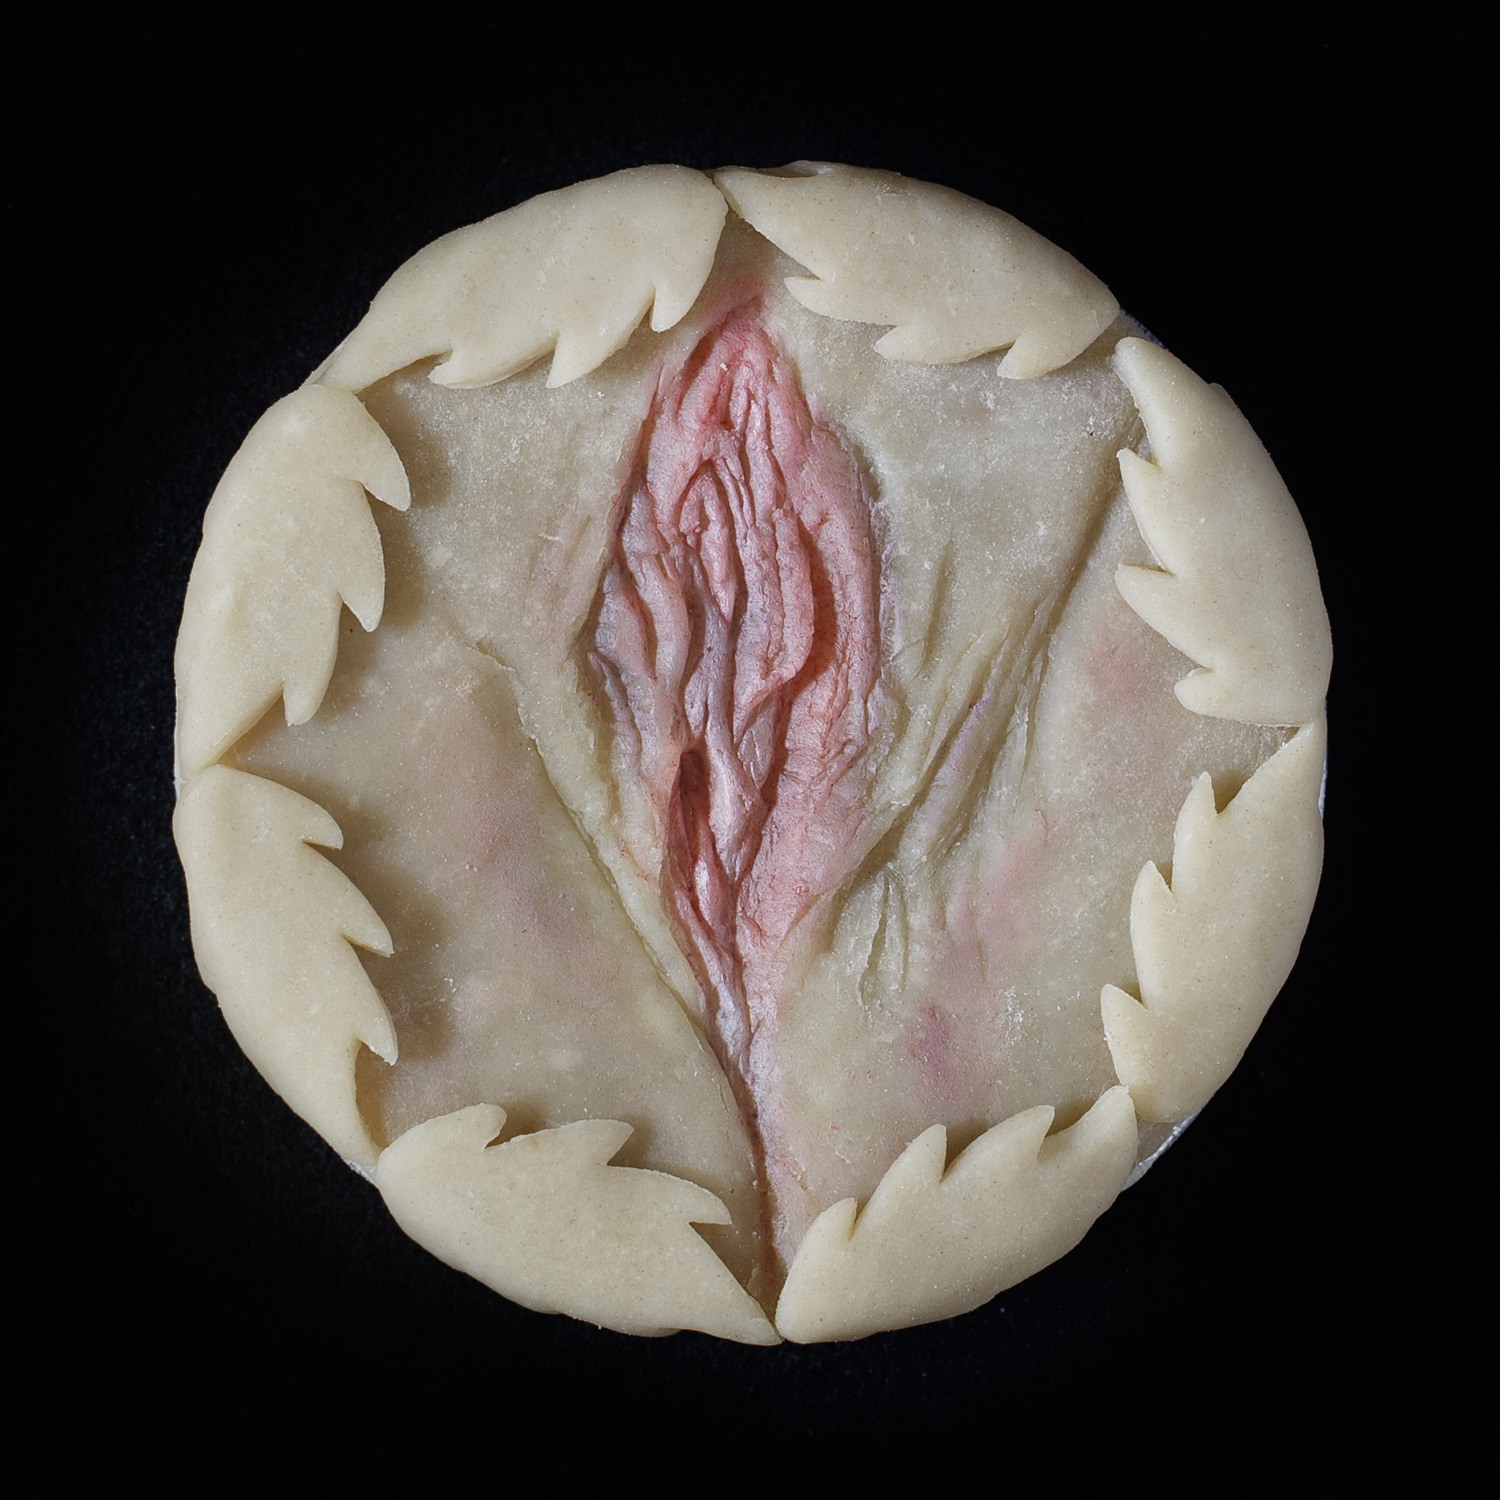 Hand sculpted vulva art on a real cherry pie on a black background